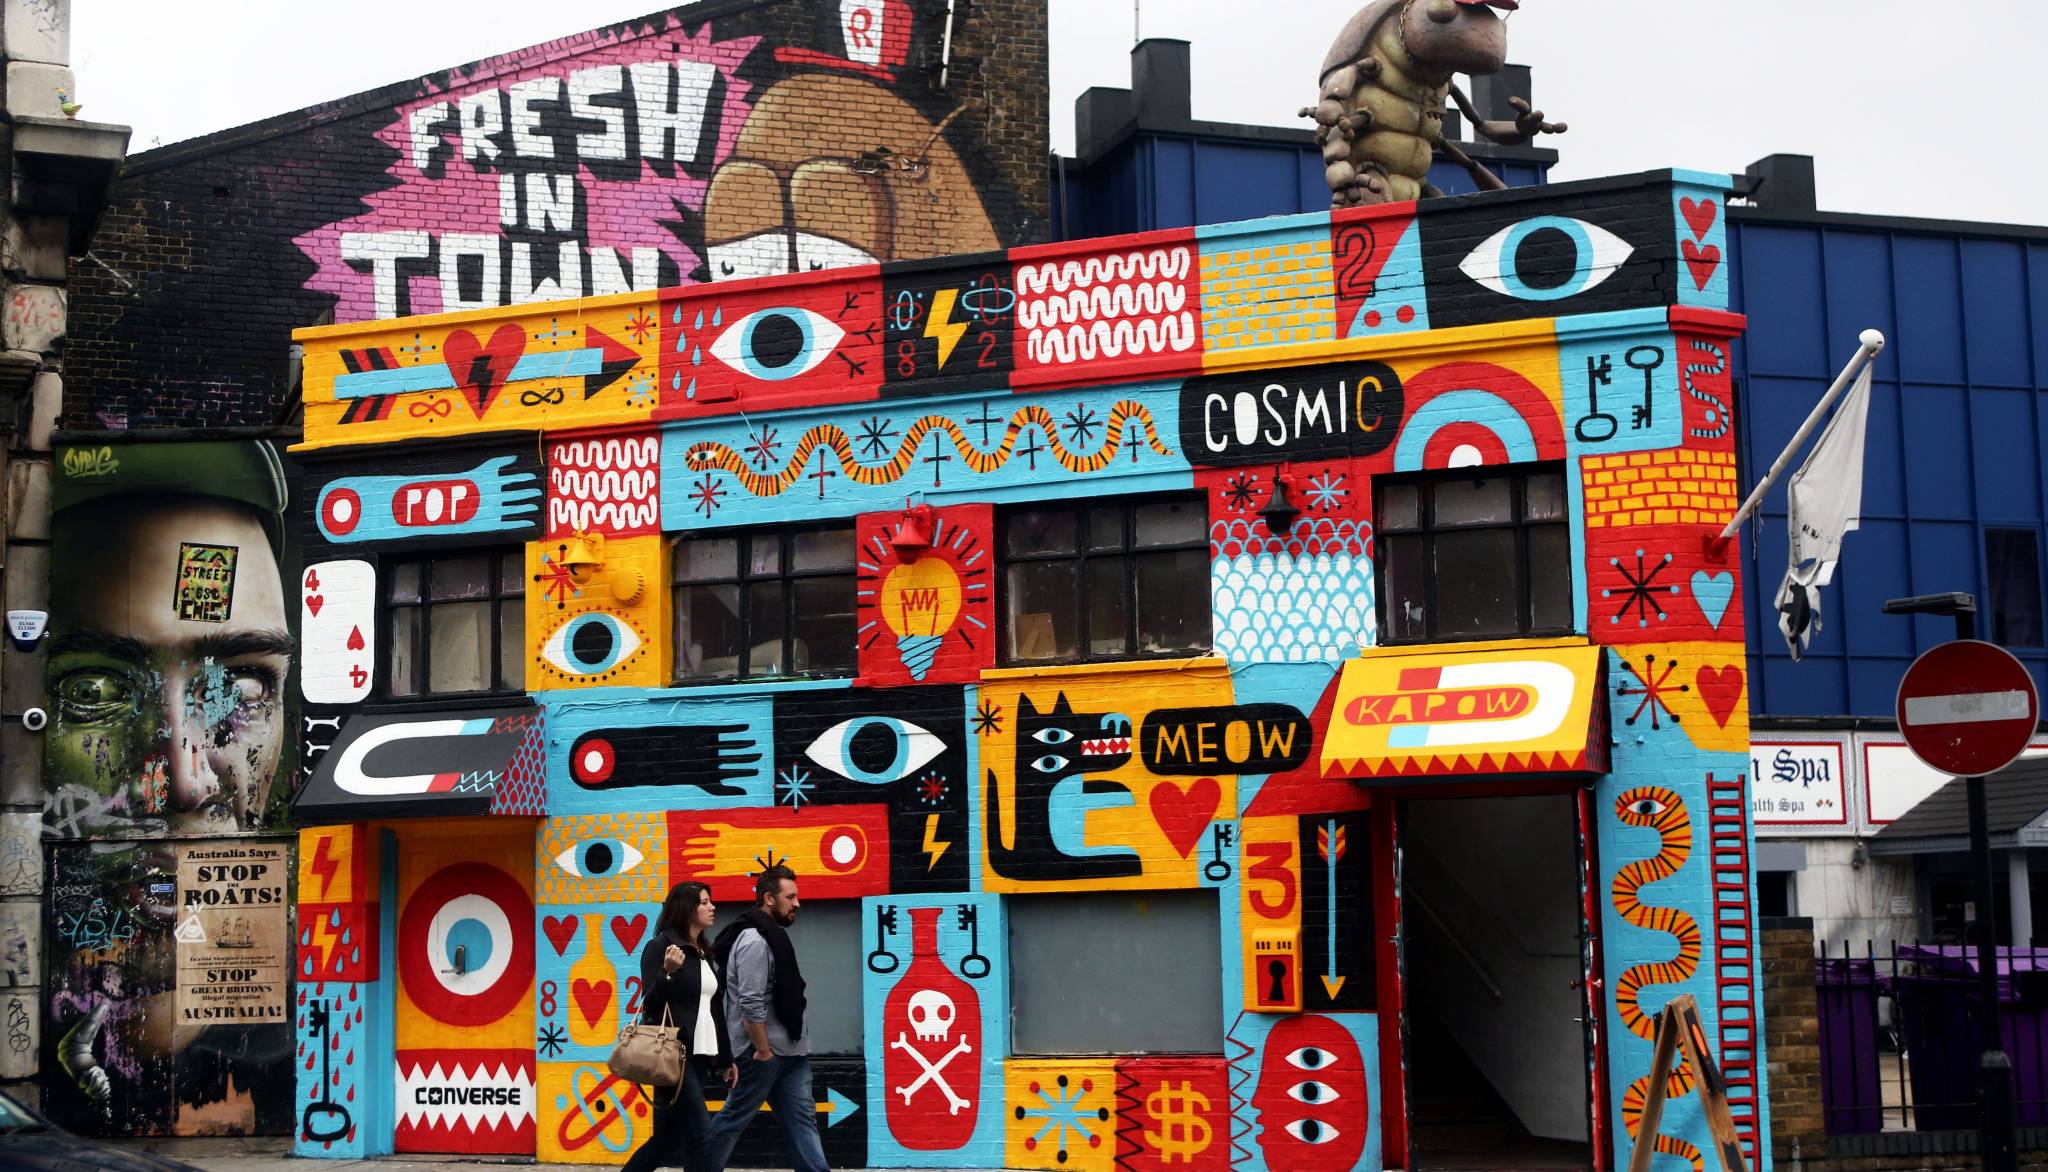 A mix of culture and trends, you will love, Shoreditch